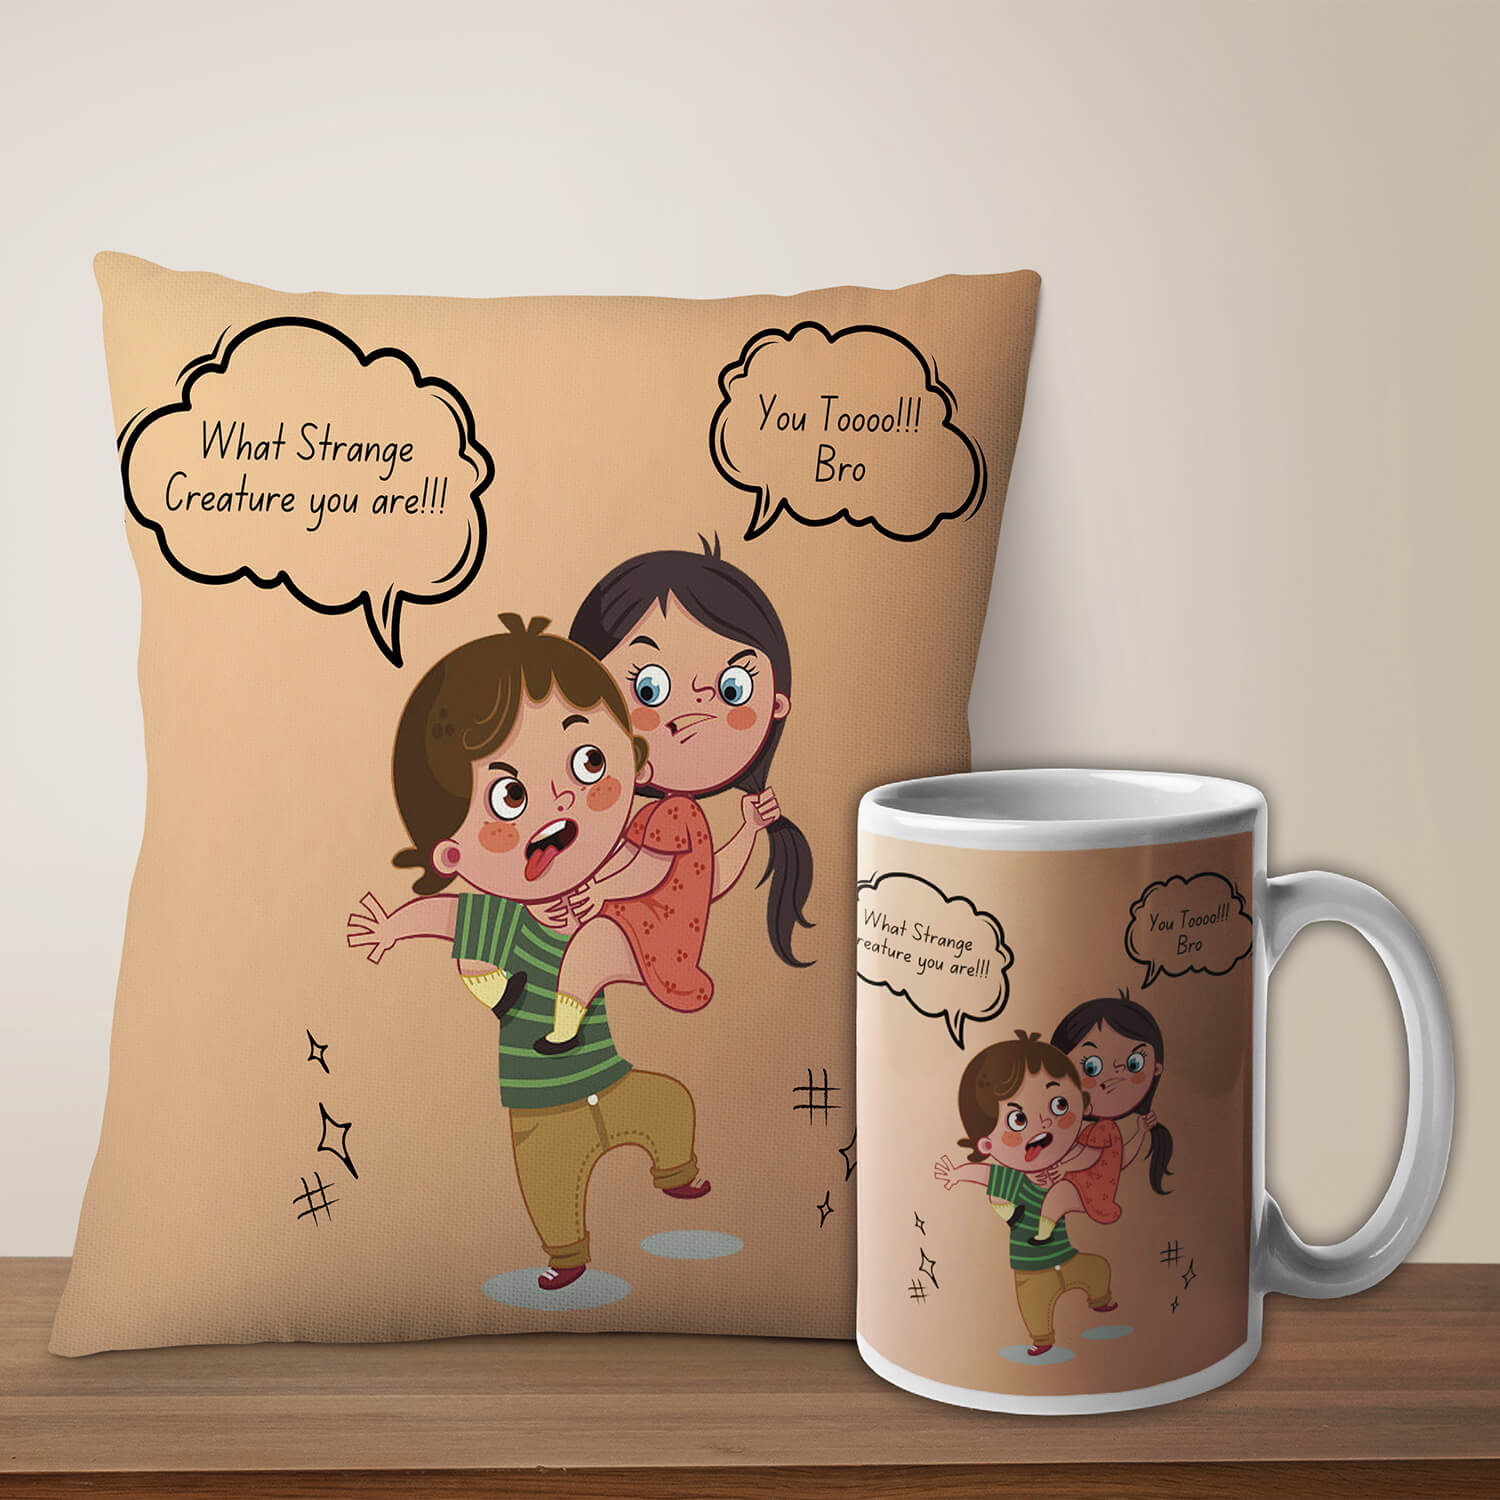 Printed Coffee Mug Cup 350ml, Decorative Throw Pillow Cushion Cover &  Filler for Gifts Brother Bhai Bro Rakhi Gift Birthday Gift (12 inch x 12  inch) 